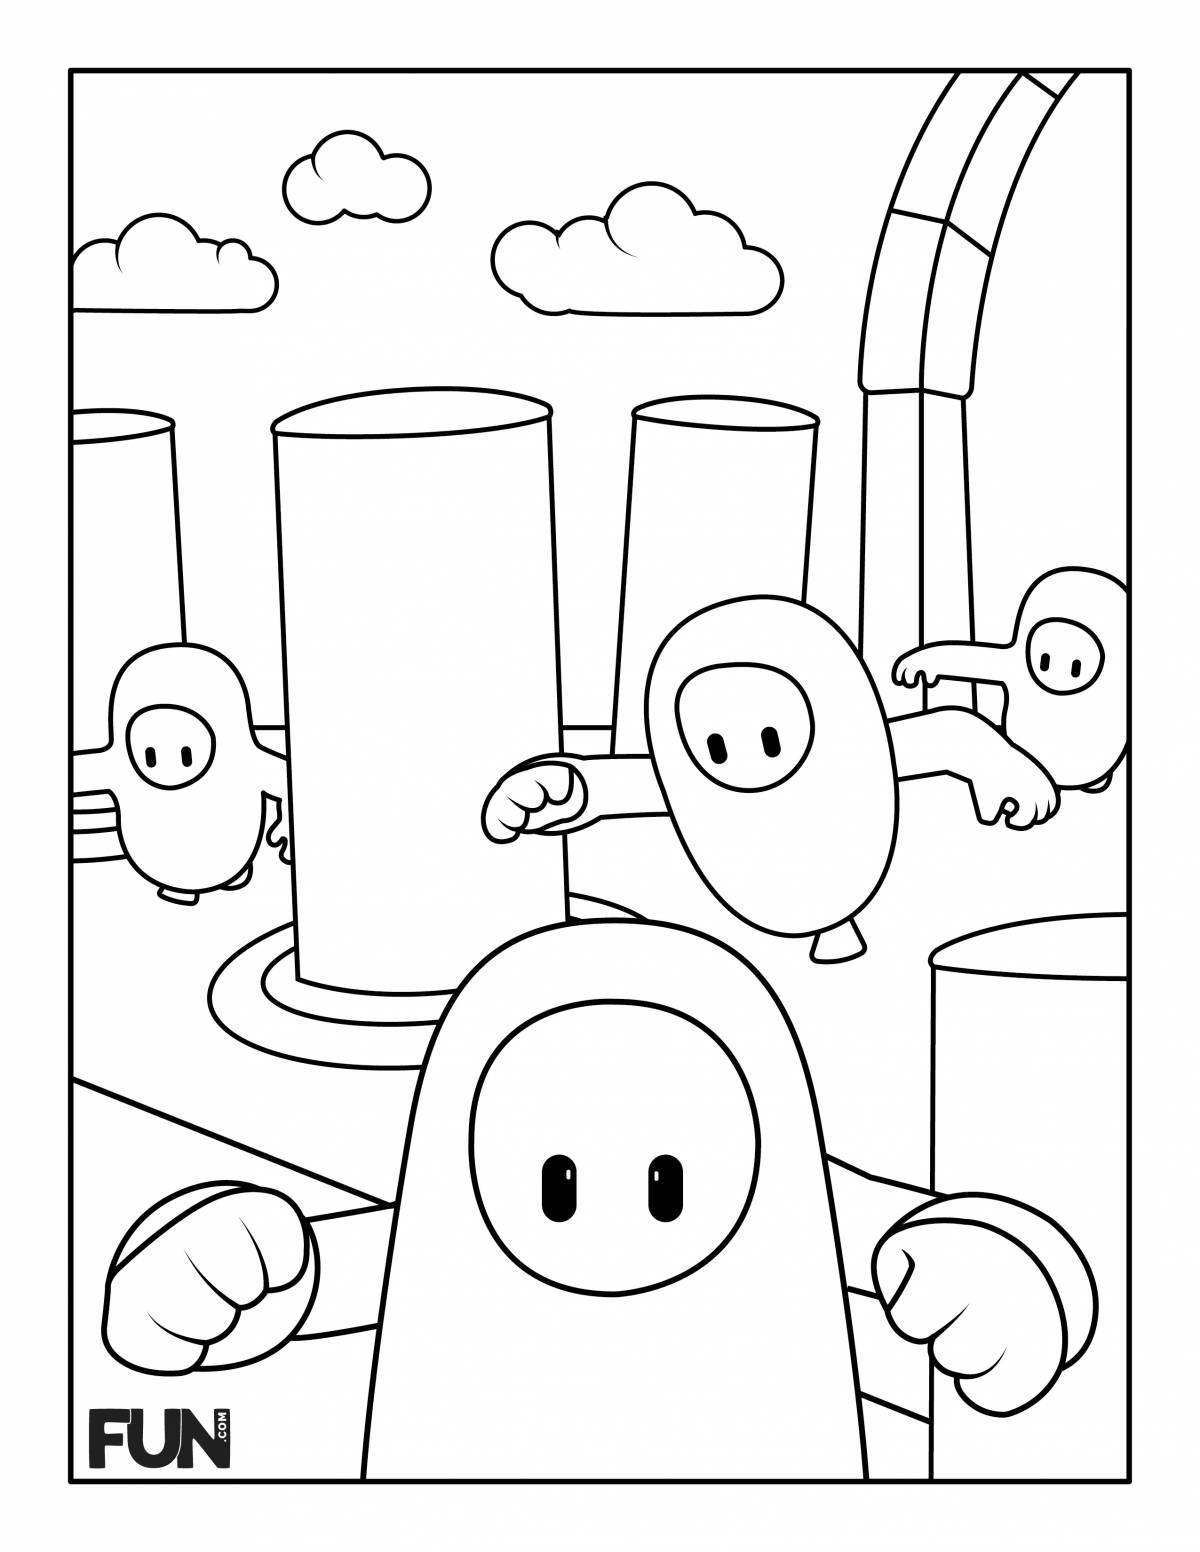 Happy coloring game on computer